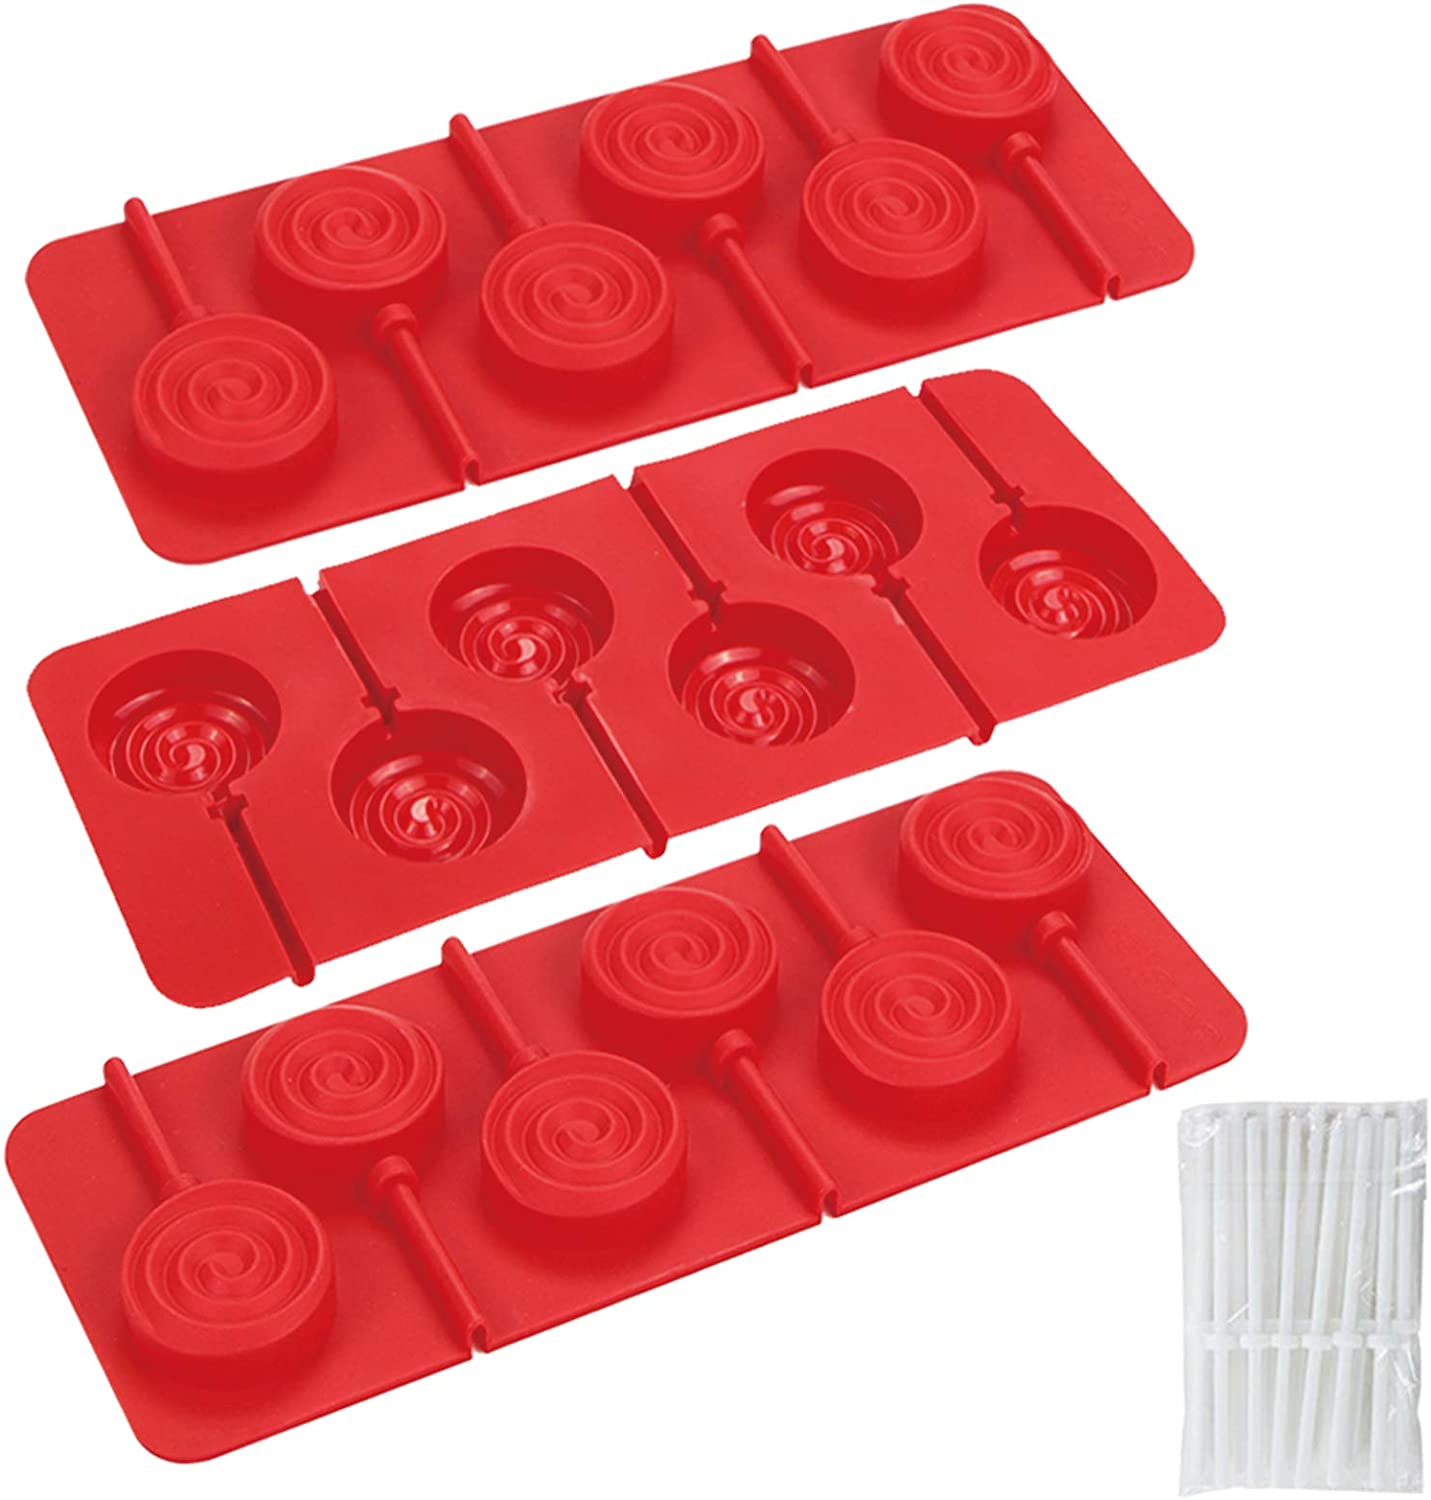 Hard Candy Molds Choose from 61 Assorted Shapes/Styles